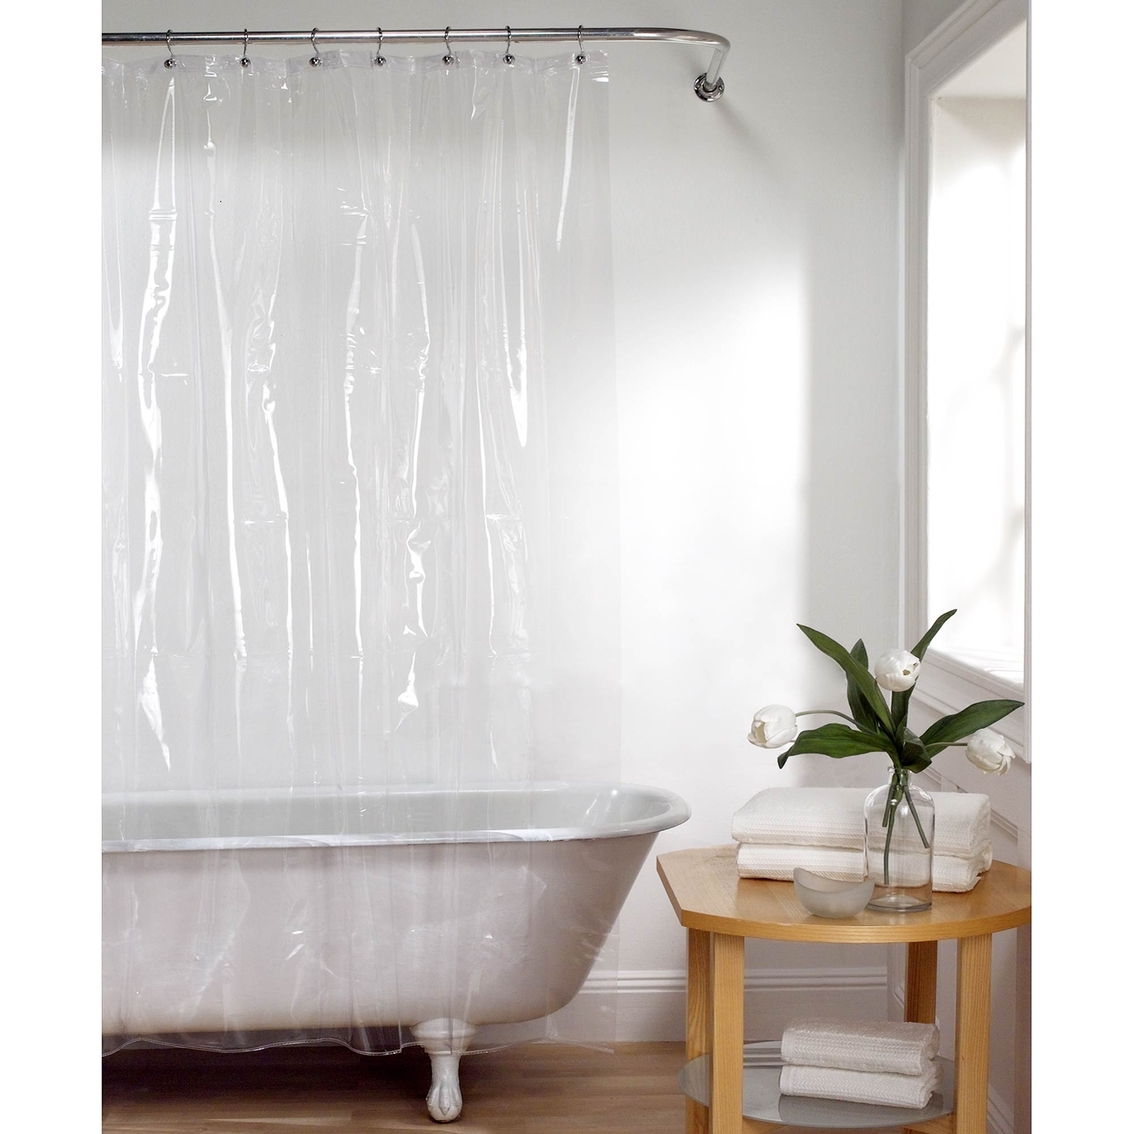 Maytex Magnetic Shower Curtain Liner, How To Install A Magnetic Shower Curtain Liner